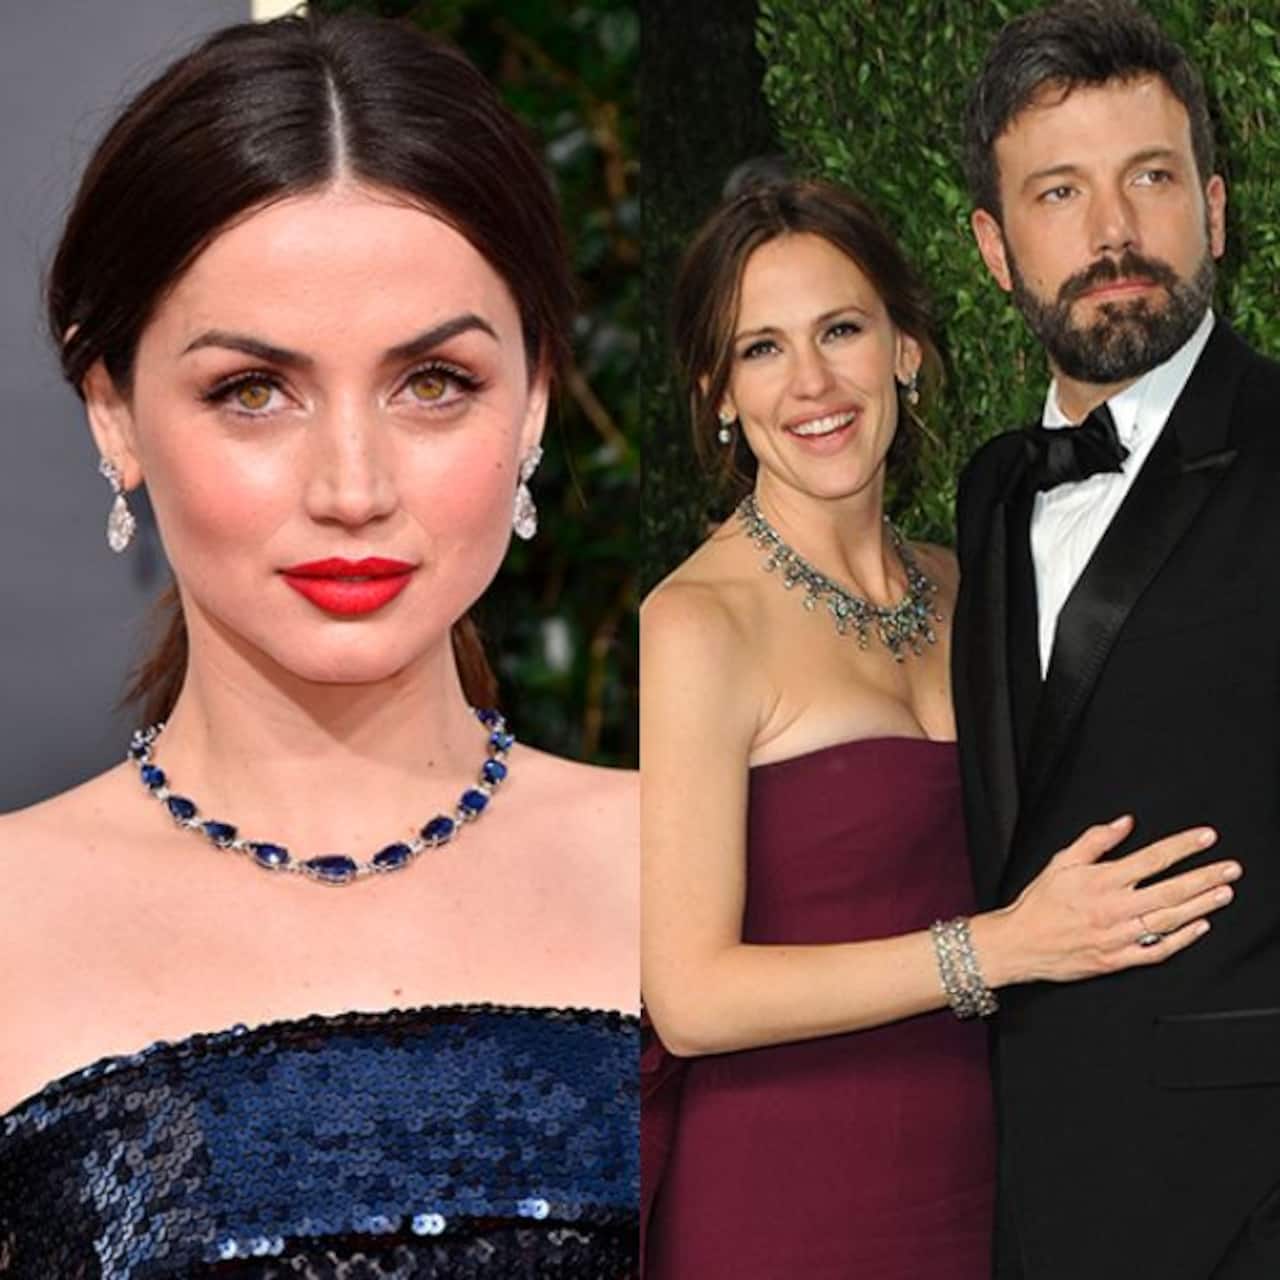 OMG! Here's how Ben Affleck's ex-wife, Jennifer Garner, REACTED after his breakup with Knives Out actress Ana de Armas